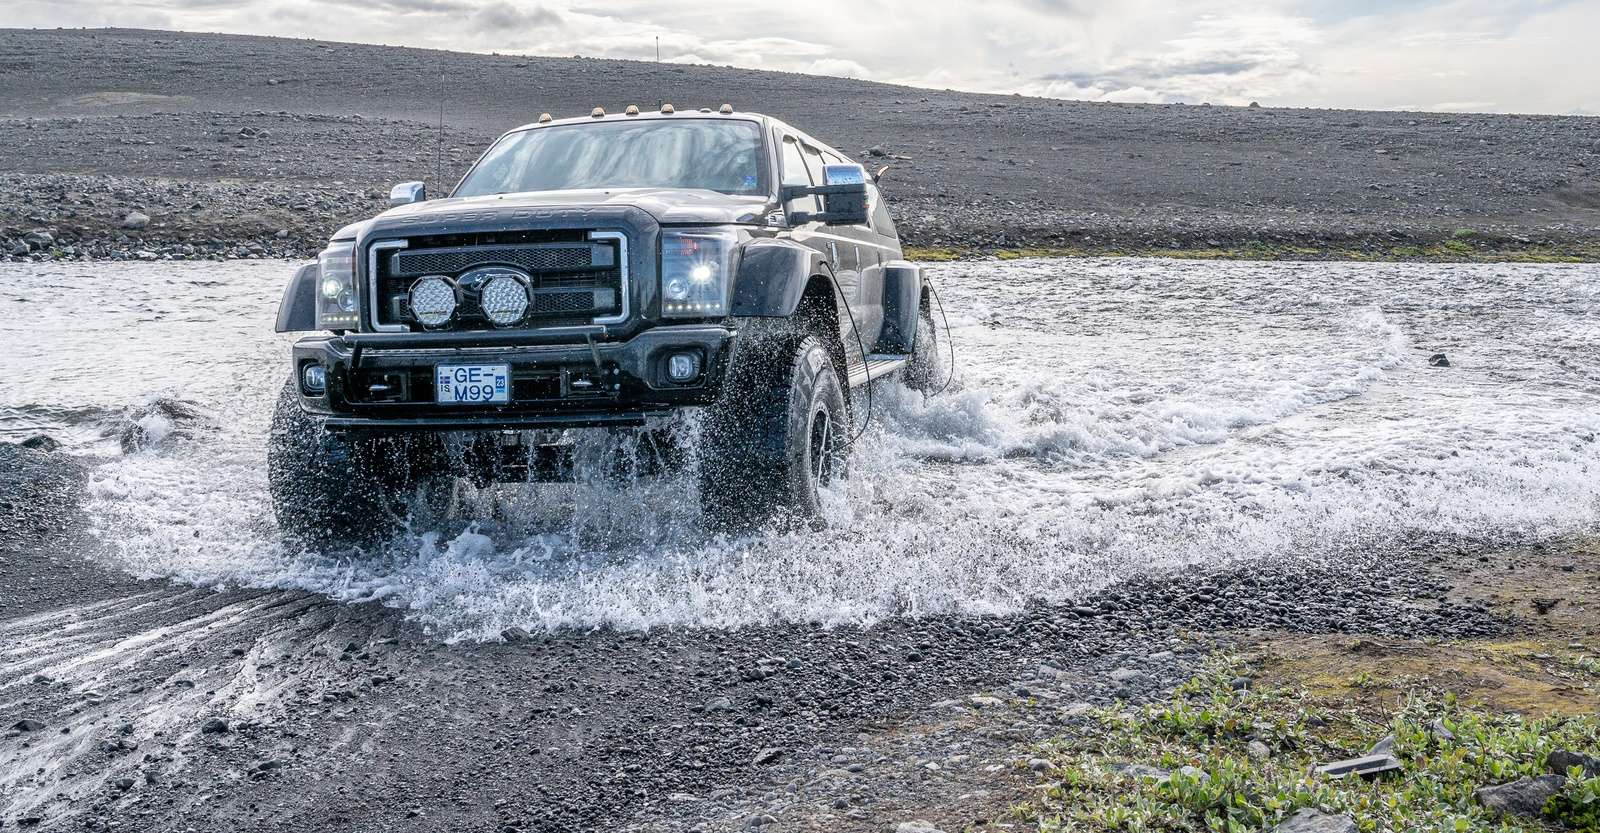 4x4 vehicle fording glacial river, Iceland.